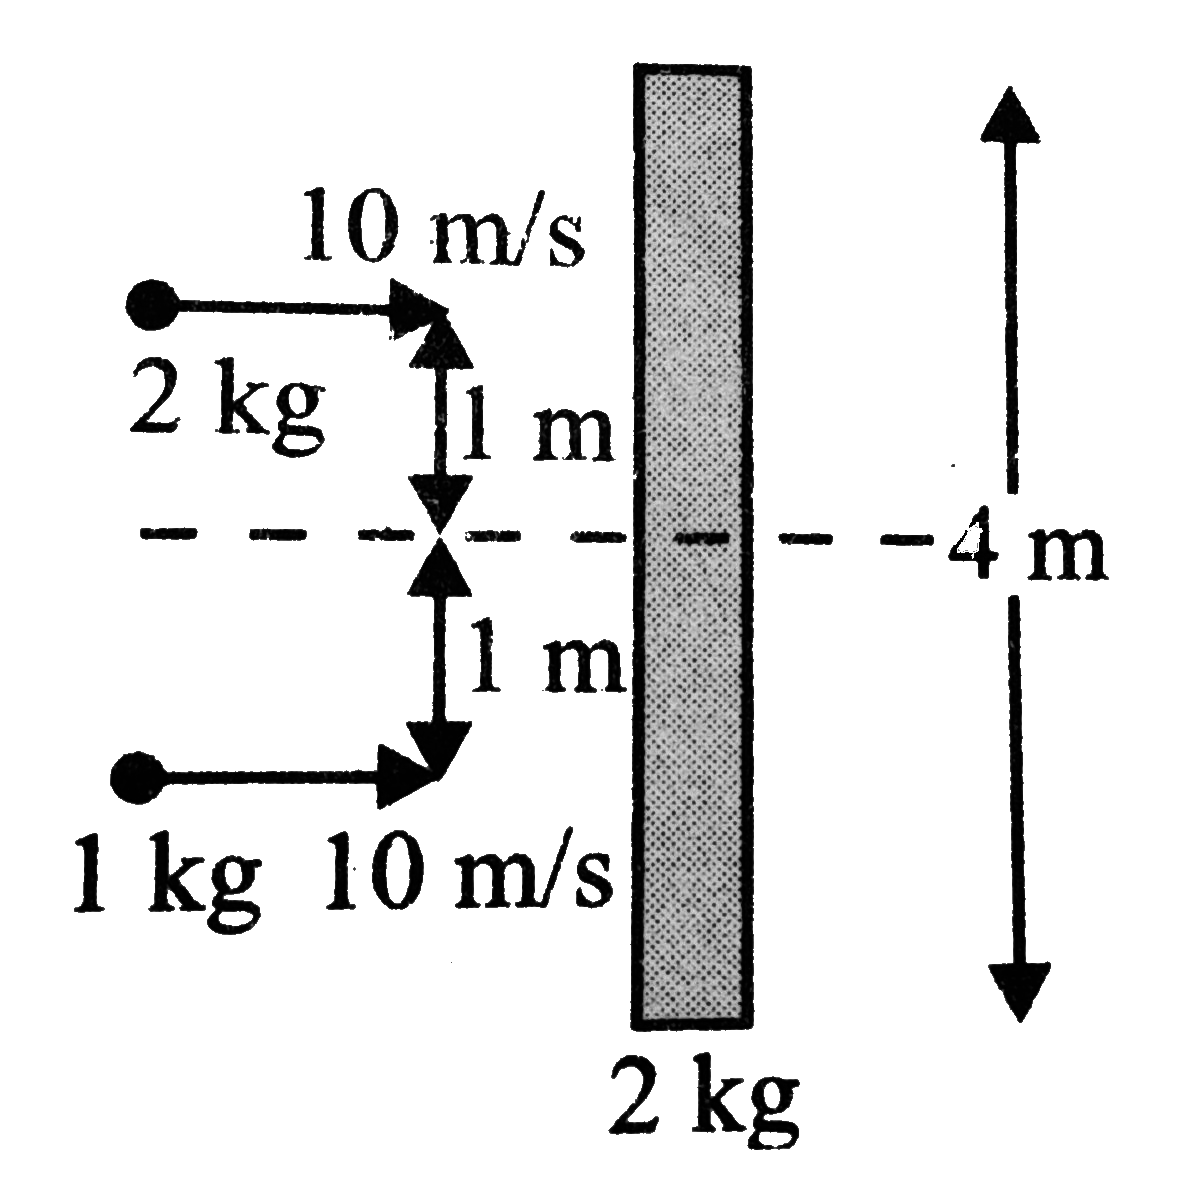 A Iong slender rod of mass 2 kg and length m is placed on a smooth horizontal table. Two particles of masses 2 kg and  1kg  strike the rod simultaneously and stick to the rod after collision as shown in  fig.        , If the two particles strike the rod in opposite direction, then after collision, as compared to the previous situation the rod will